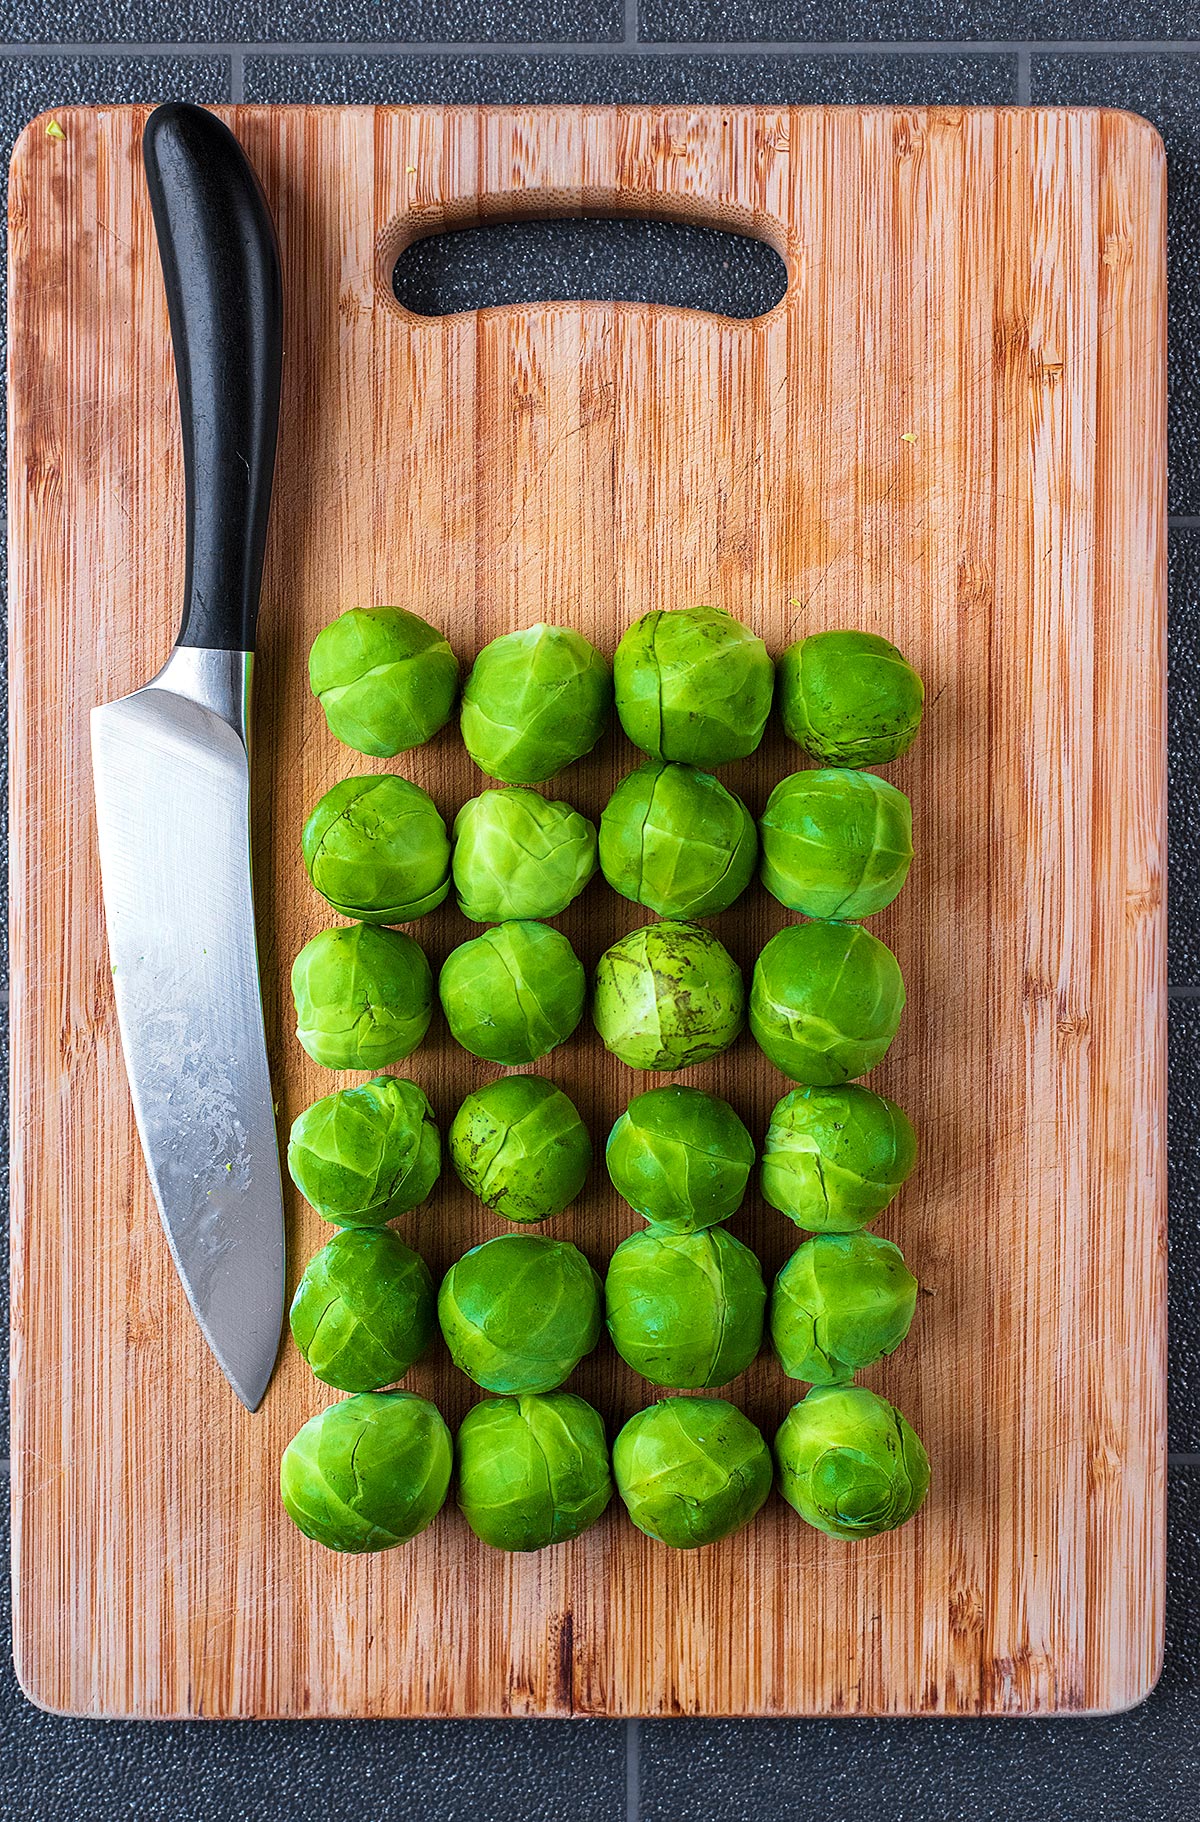 Twenty Four Brussels Sprouts on a wooden chopping board with a large knife.